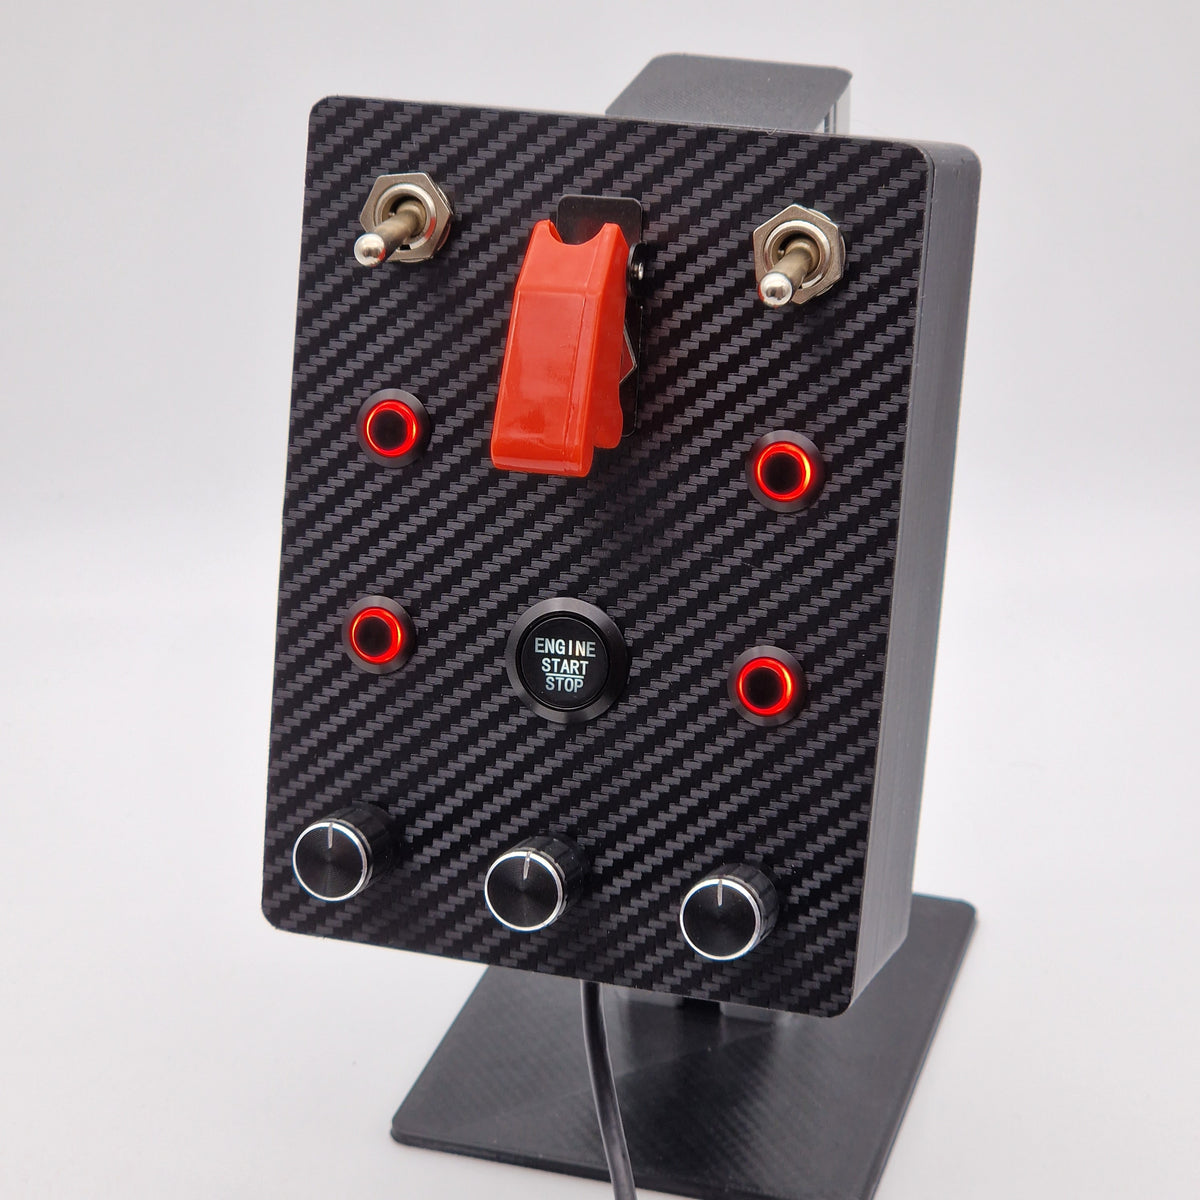 The BEST Simracing Button Box for Simracers